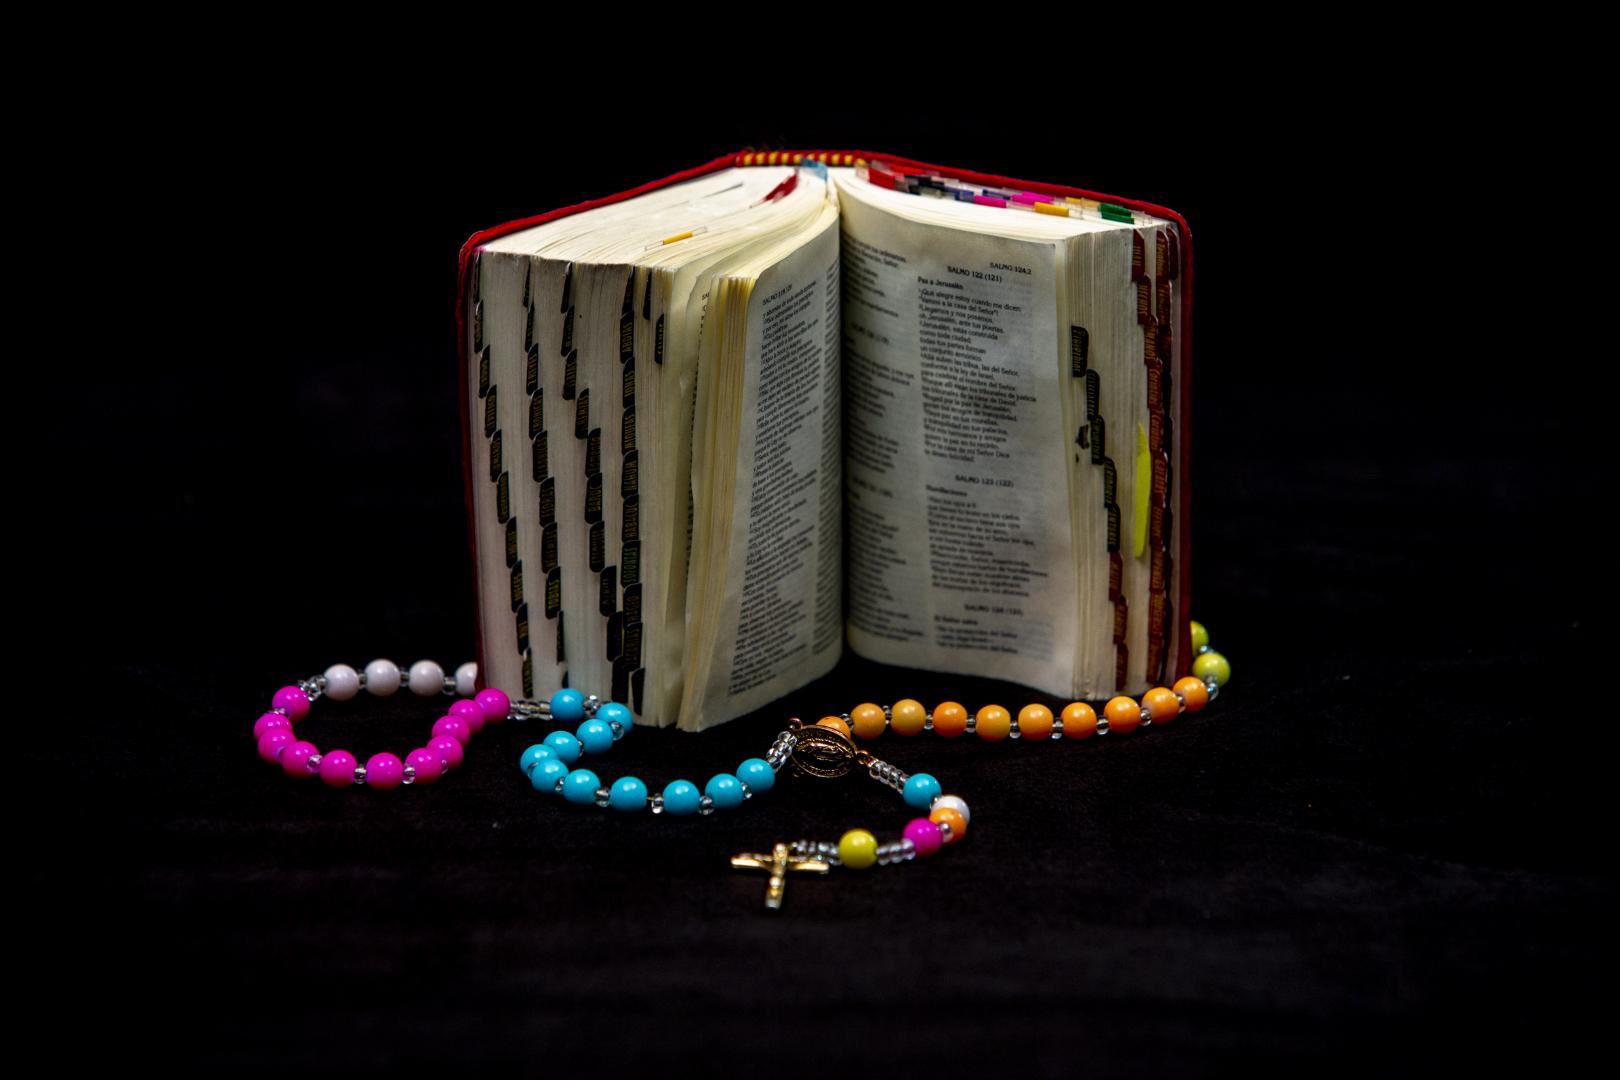 The Bible and the rosary treasured by María.